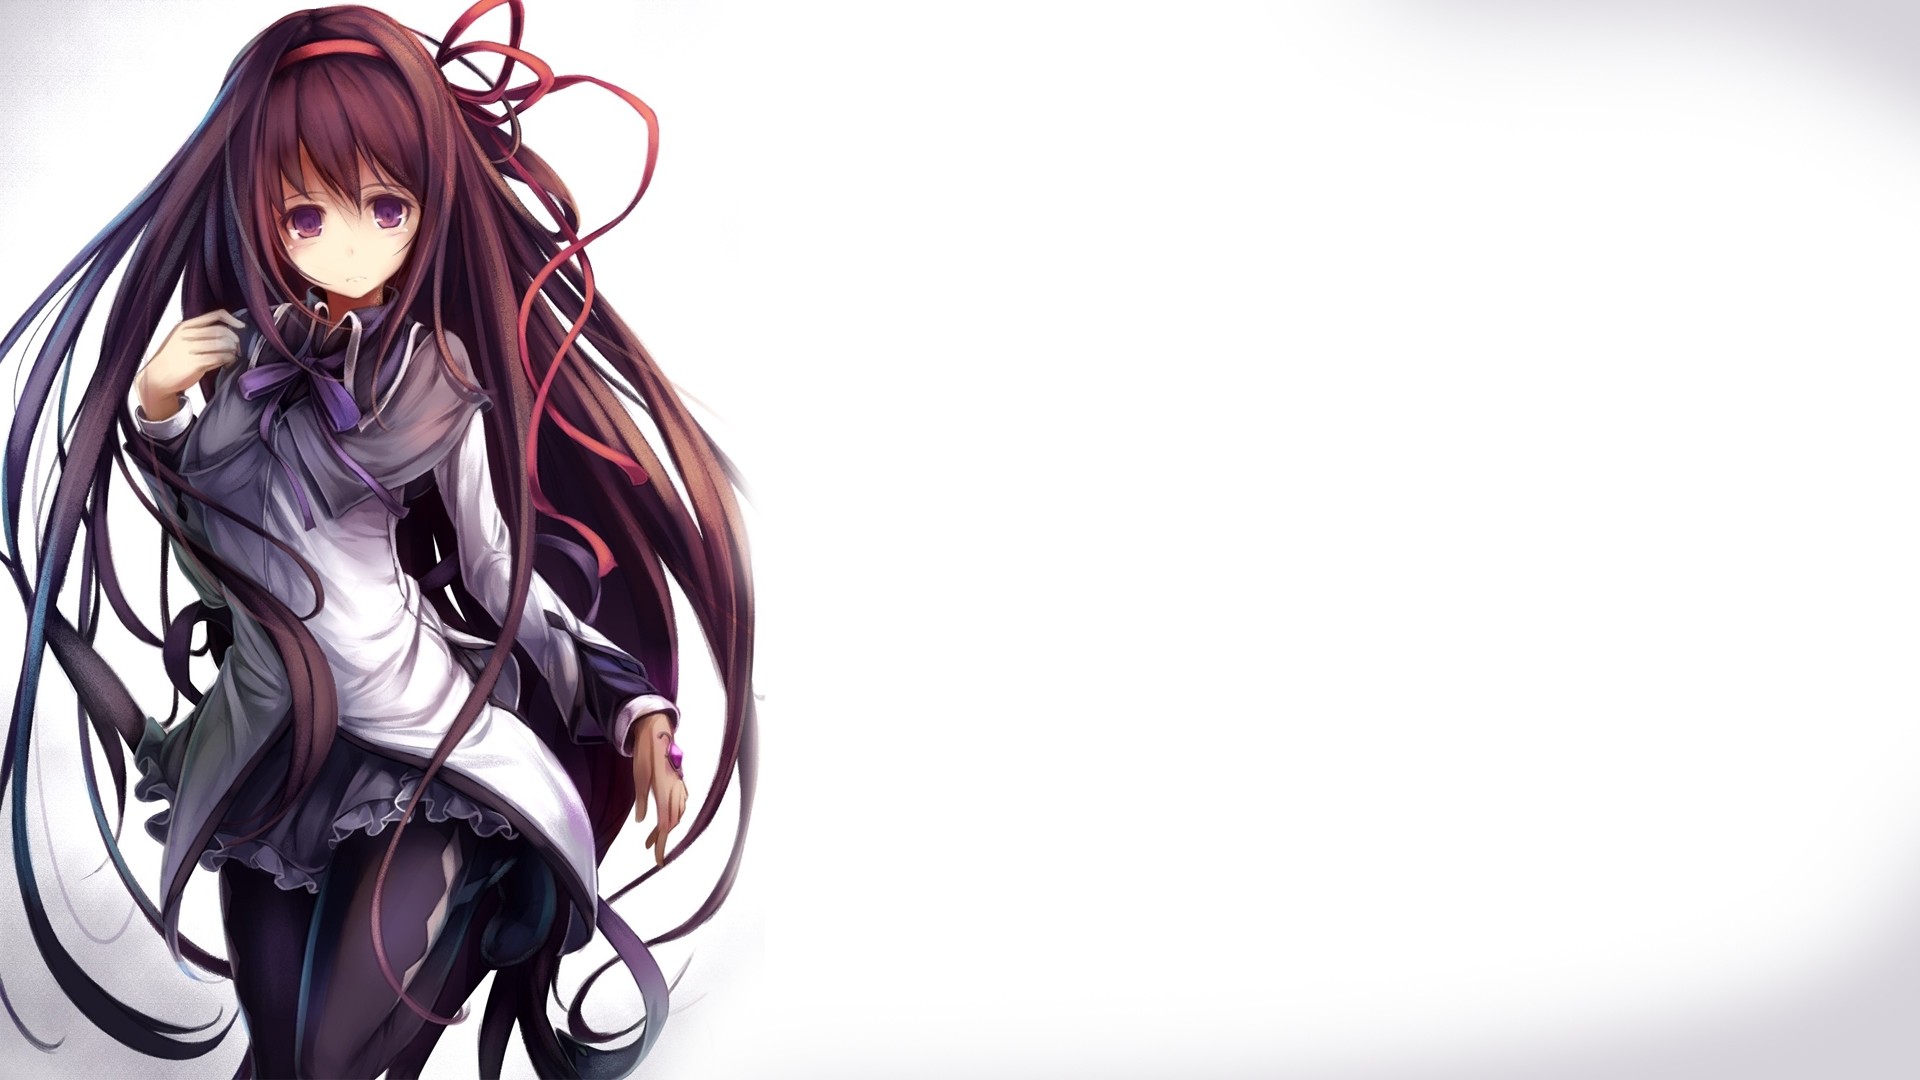 1920x1080 Free Download Anime Girl Wallpapers HD.